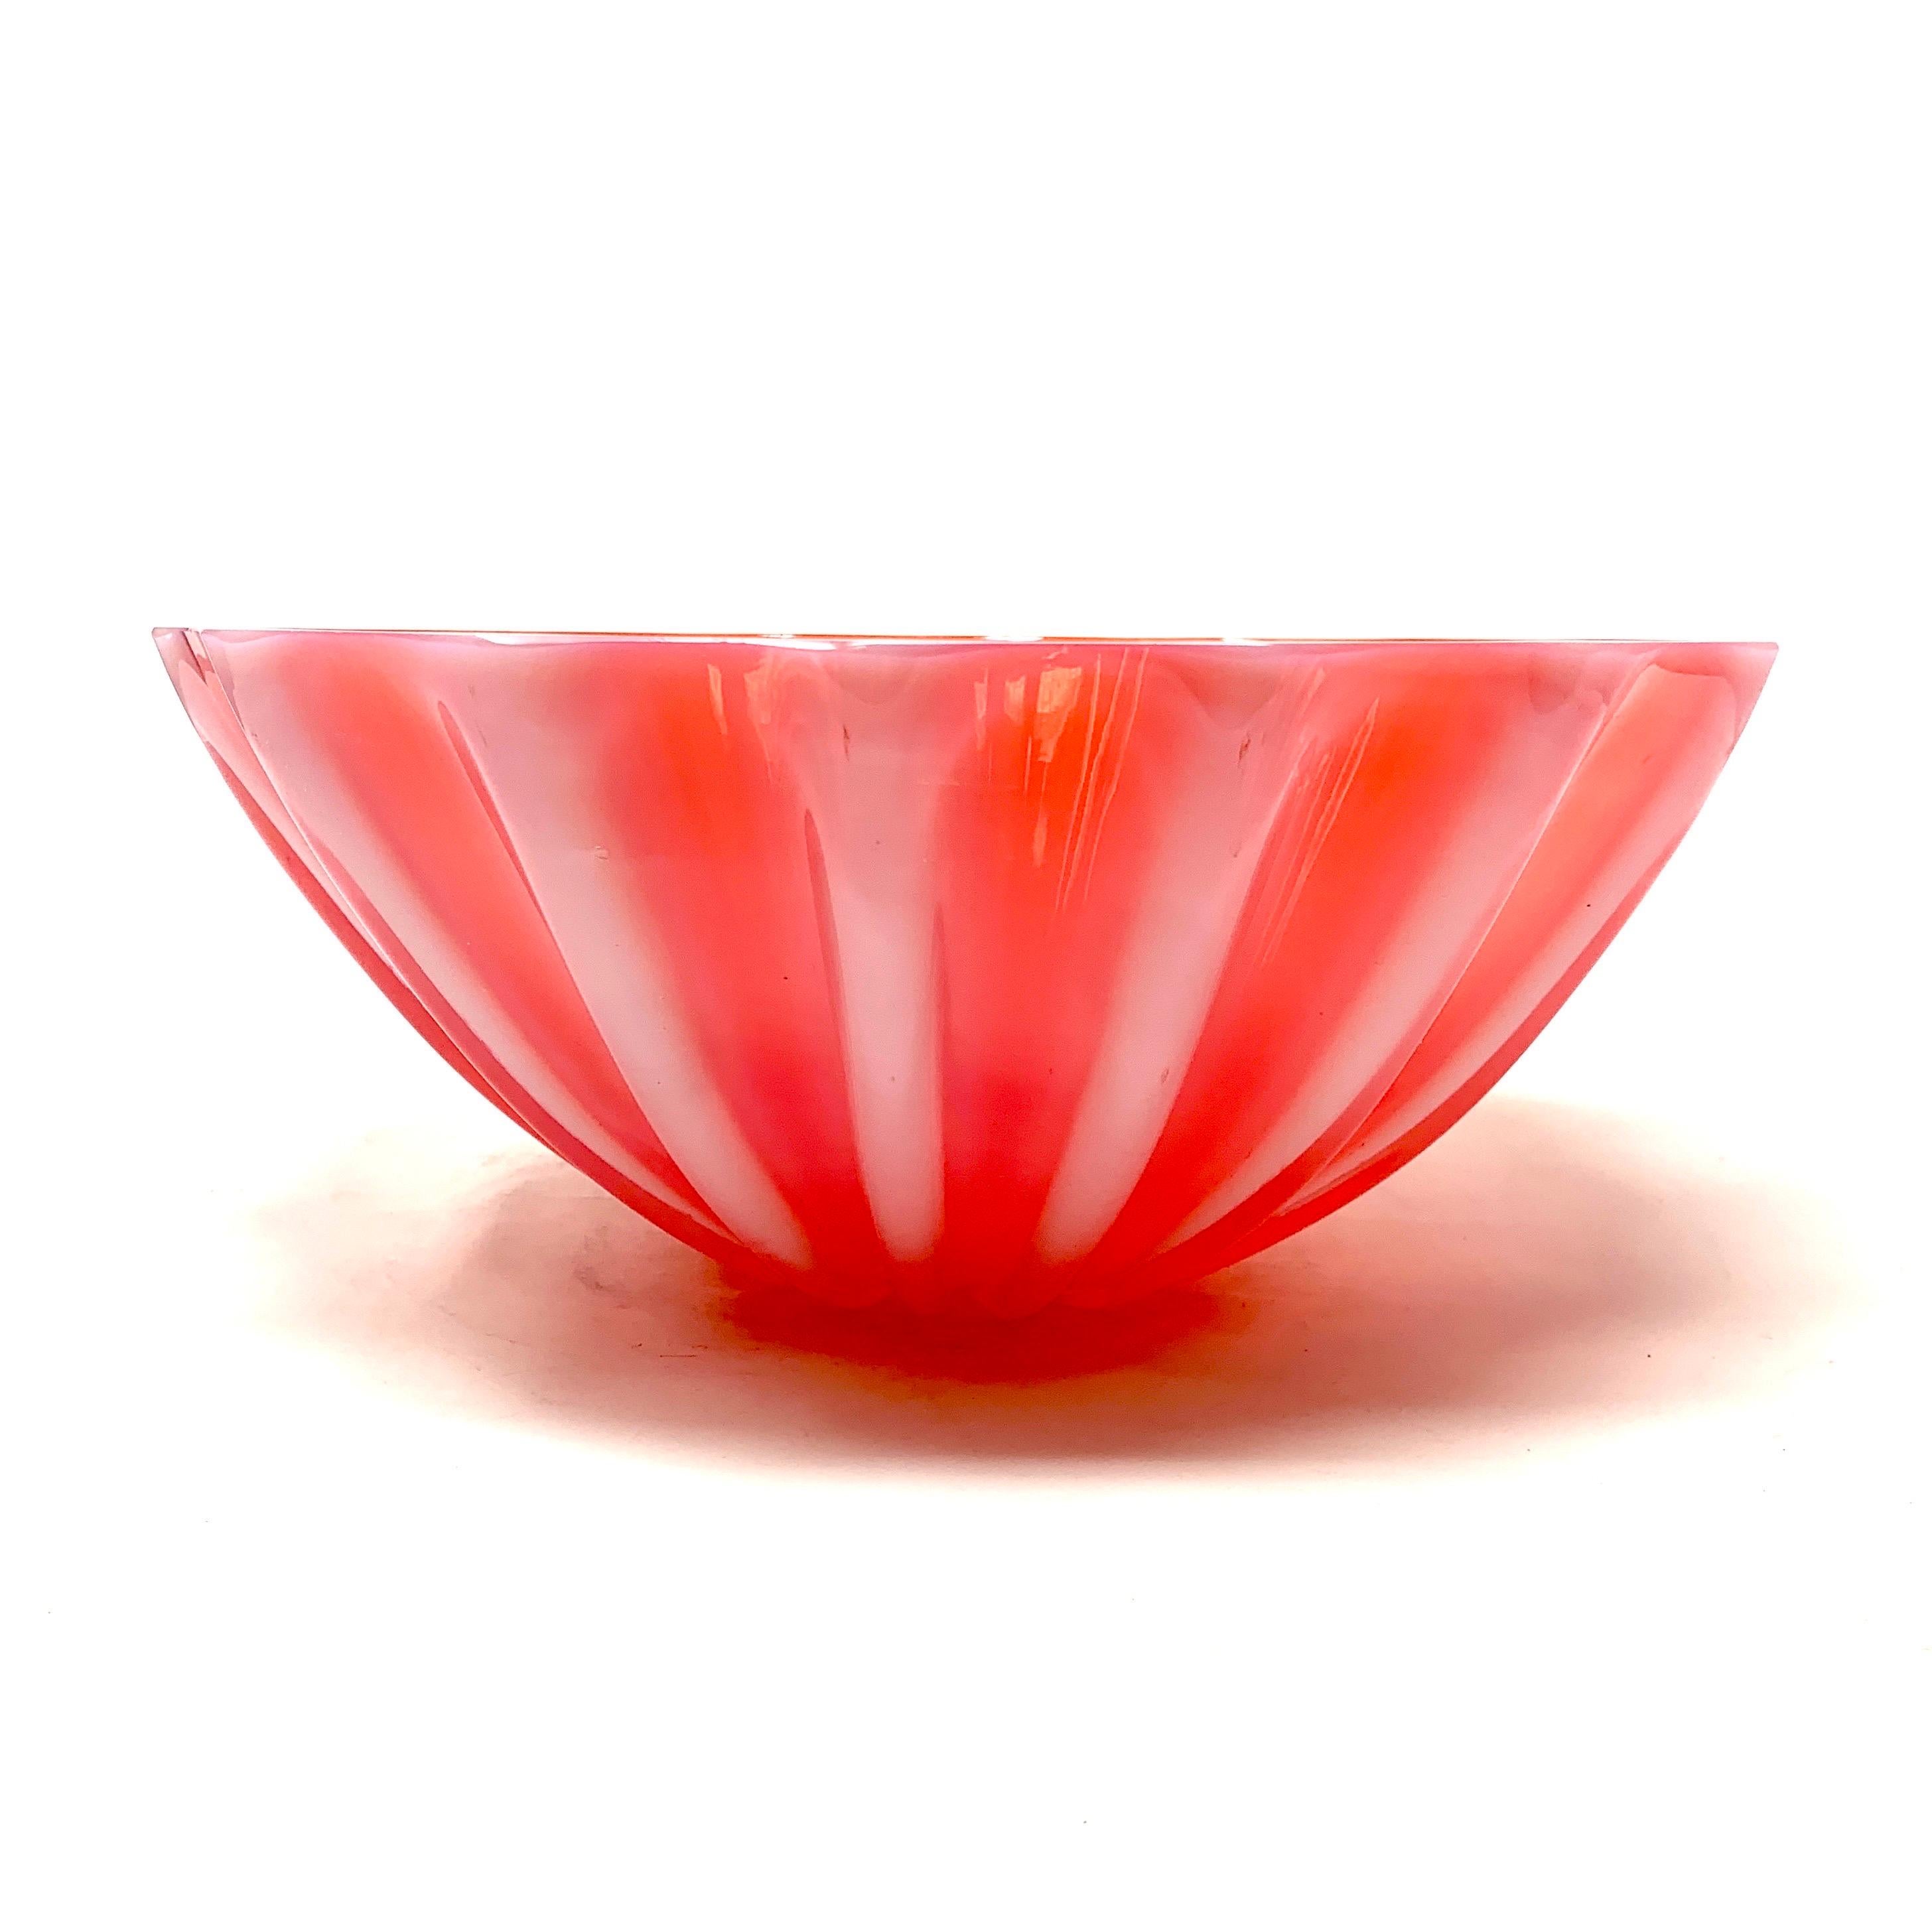 Vintage Italian Murano sommerso art glass bowl by Vetreria Archimede Seguso. The interior of the bowl is orange, with a translucent white exterior. In excellent condition.

Diameter: 11 in / Height: 4.75 in.